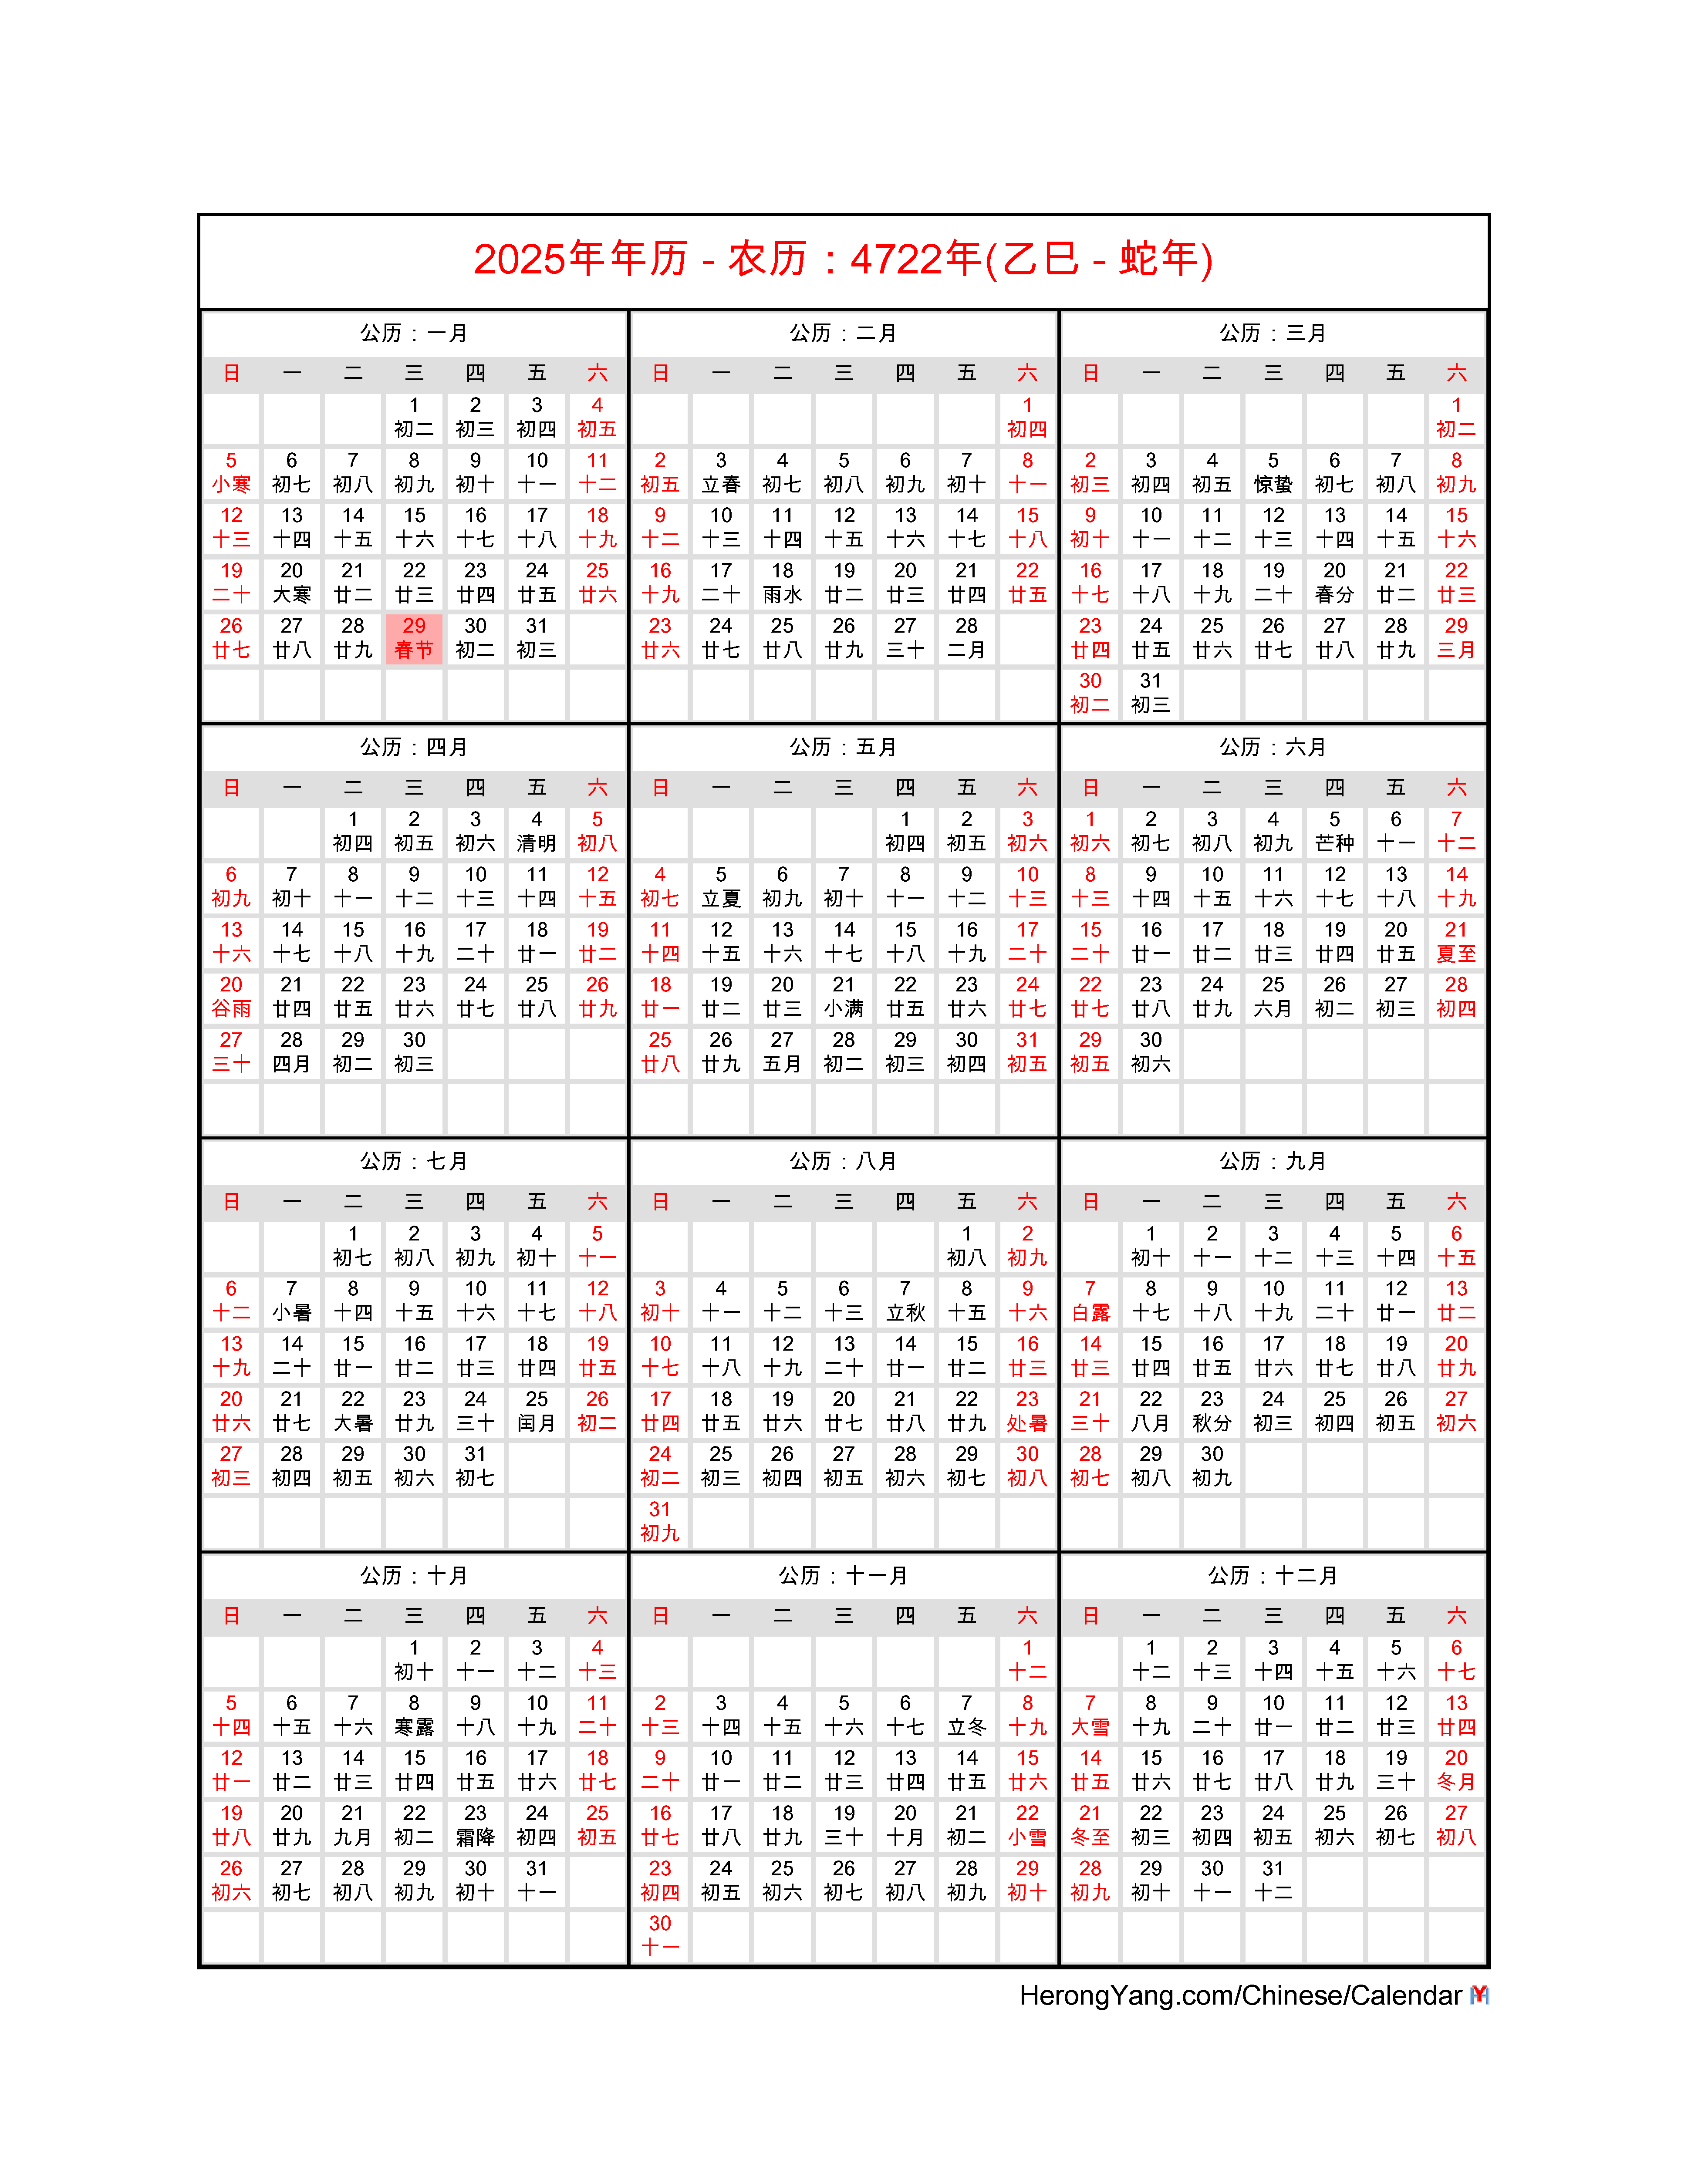 2025 Calendar With Chinese Dates In Excel - Alma Lyndel